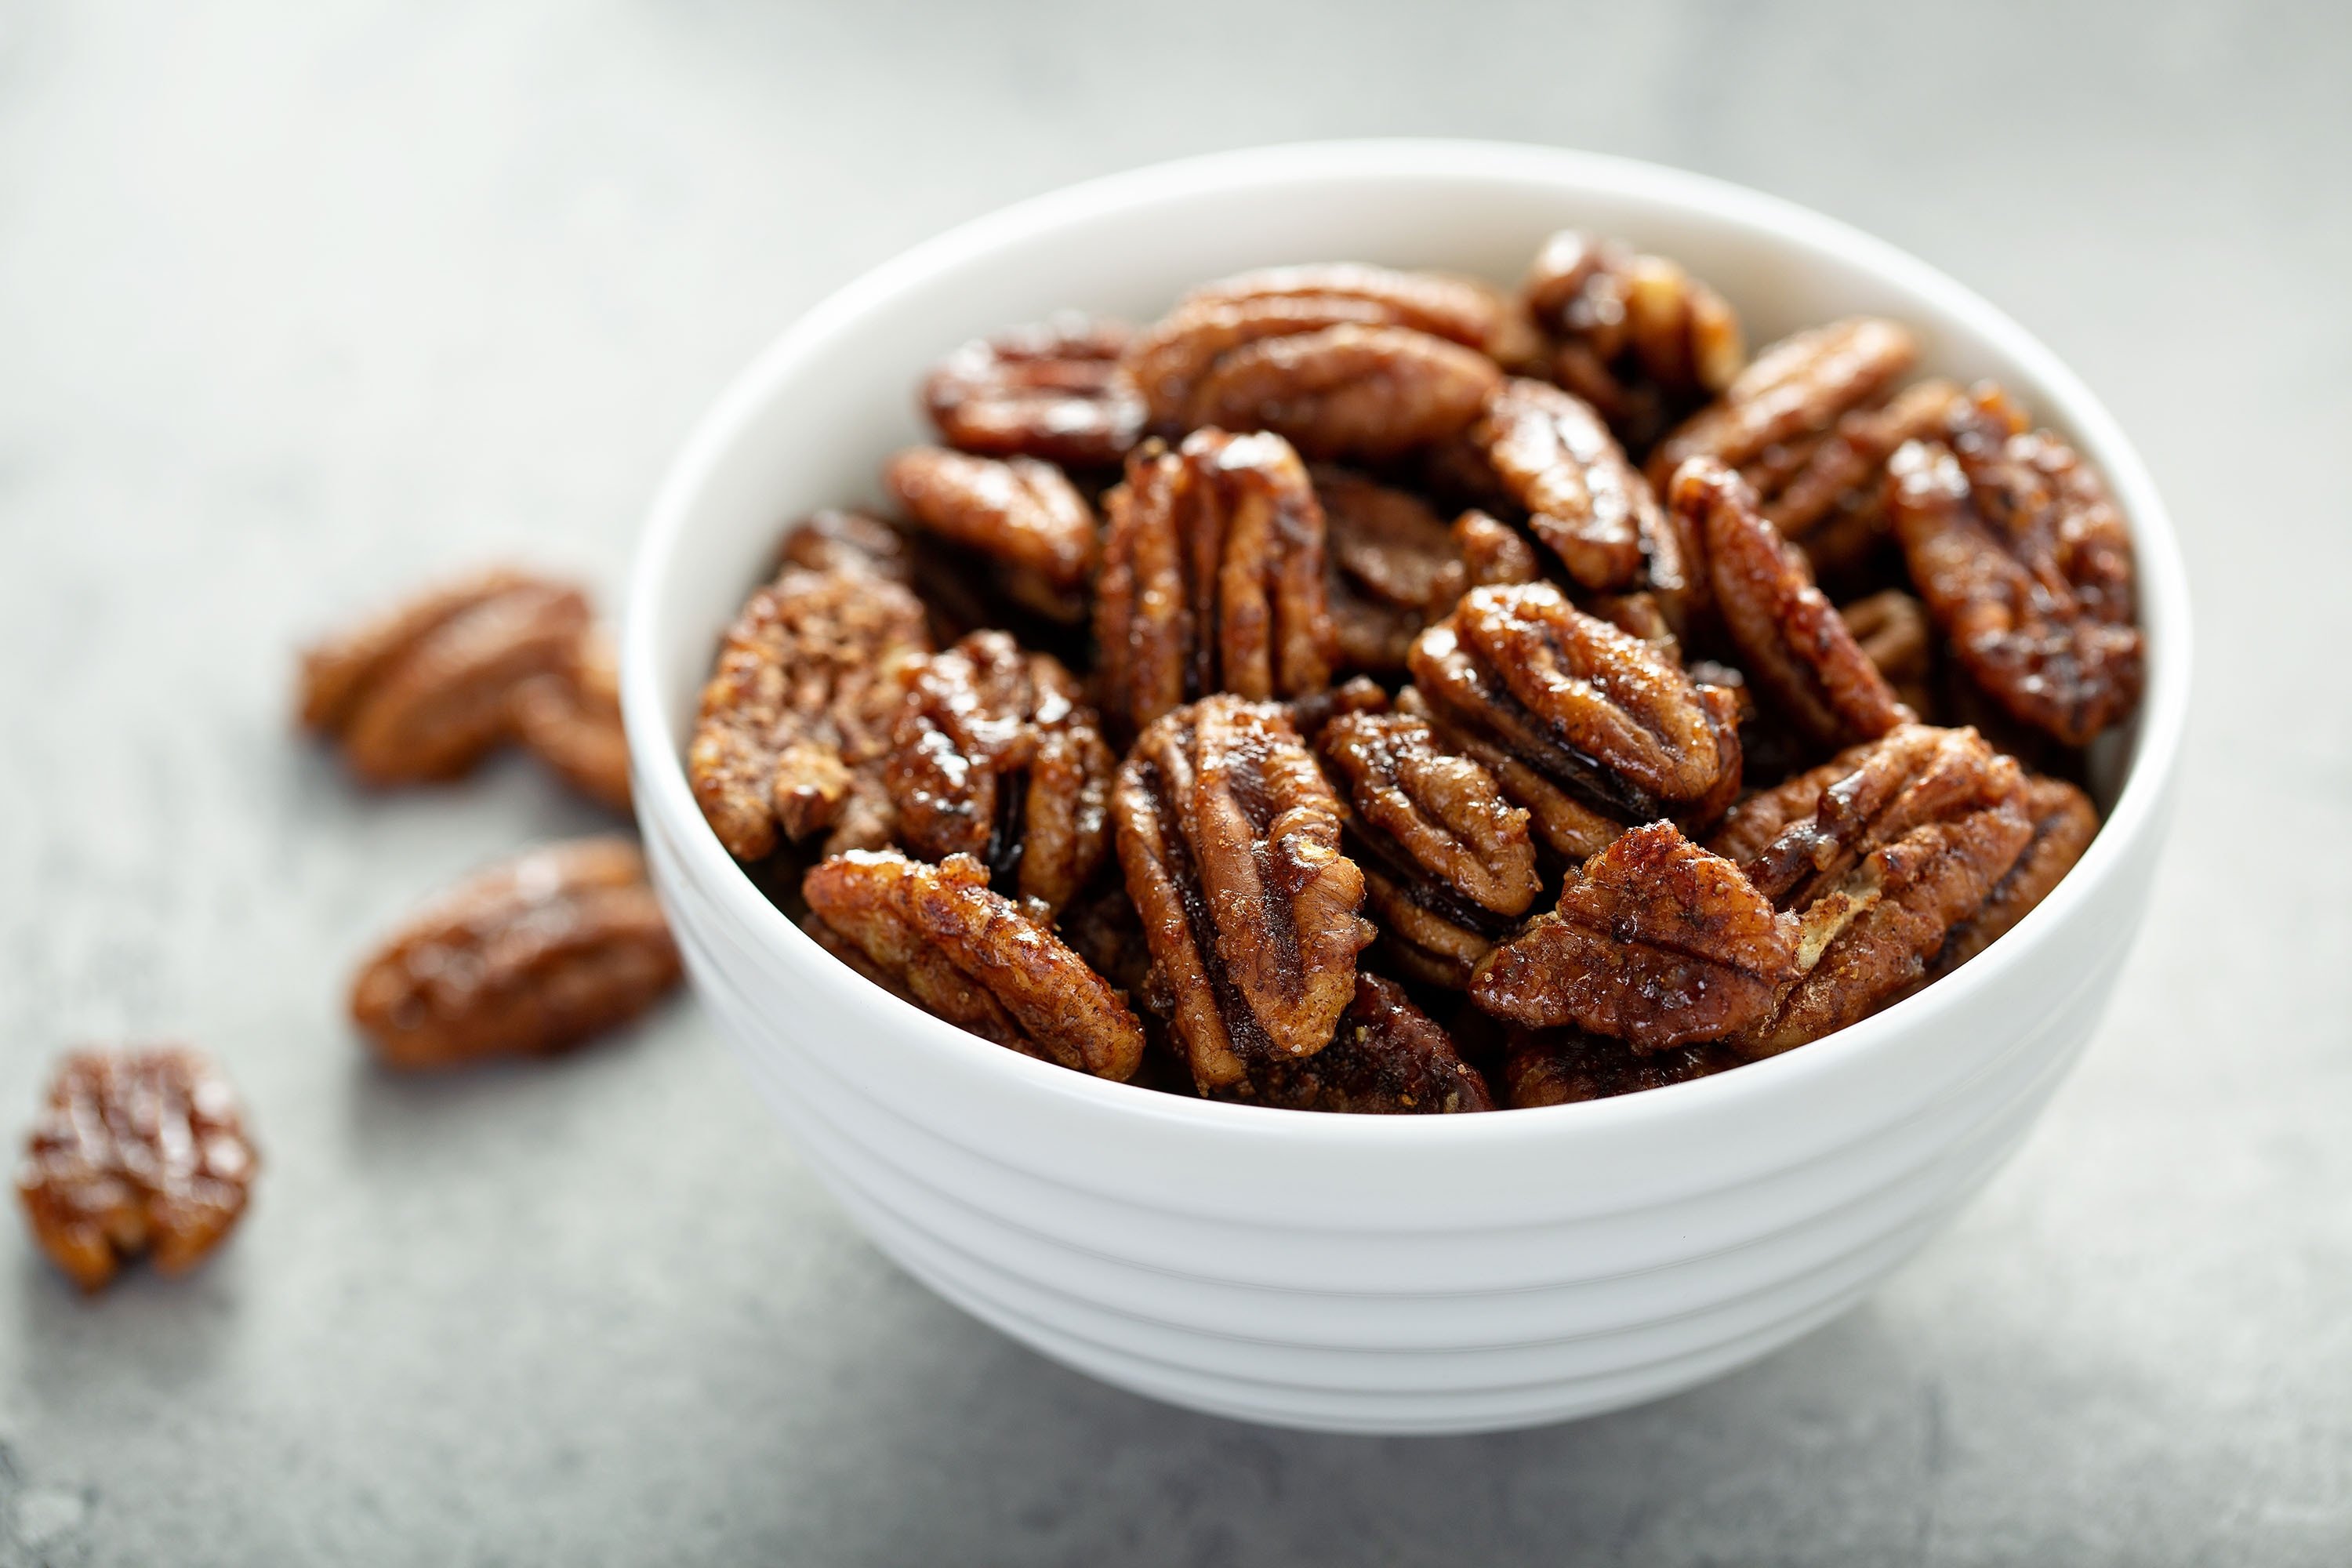 Caramelized candied walnuts in a bowl.  (Photo Shutterstock)